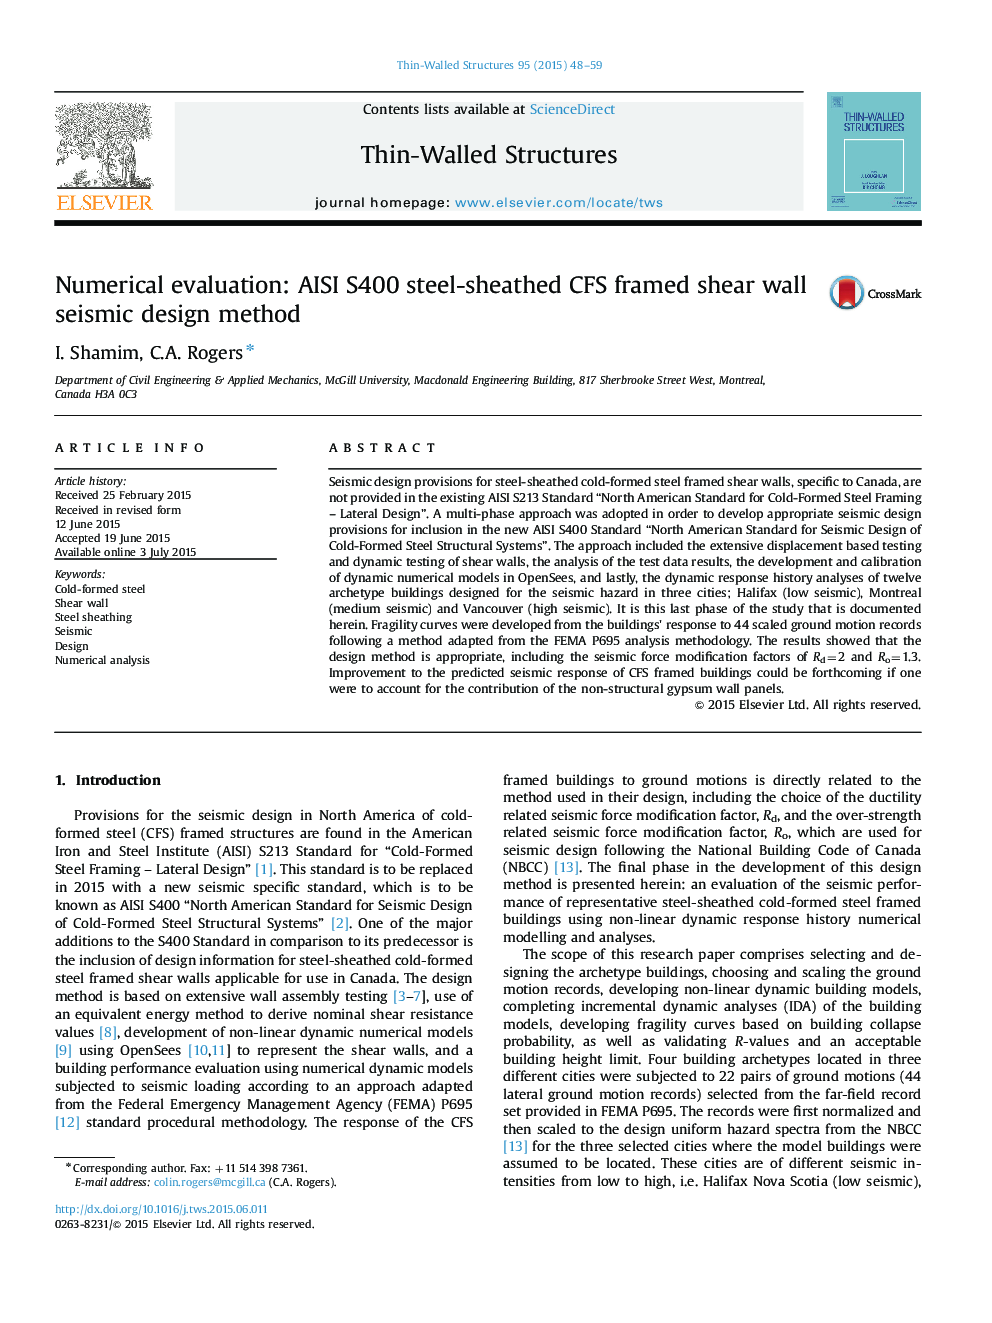 Numerical evaluation: AISI S400 steel-sheathed CFS framed shear wall seismic design method